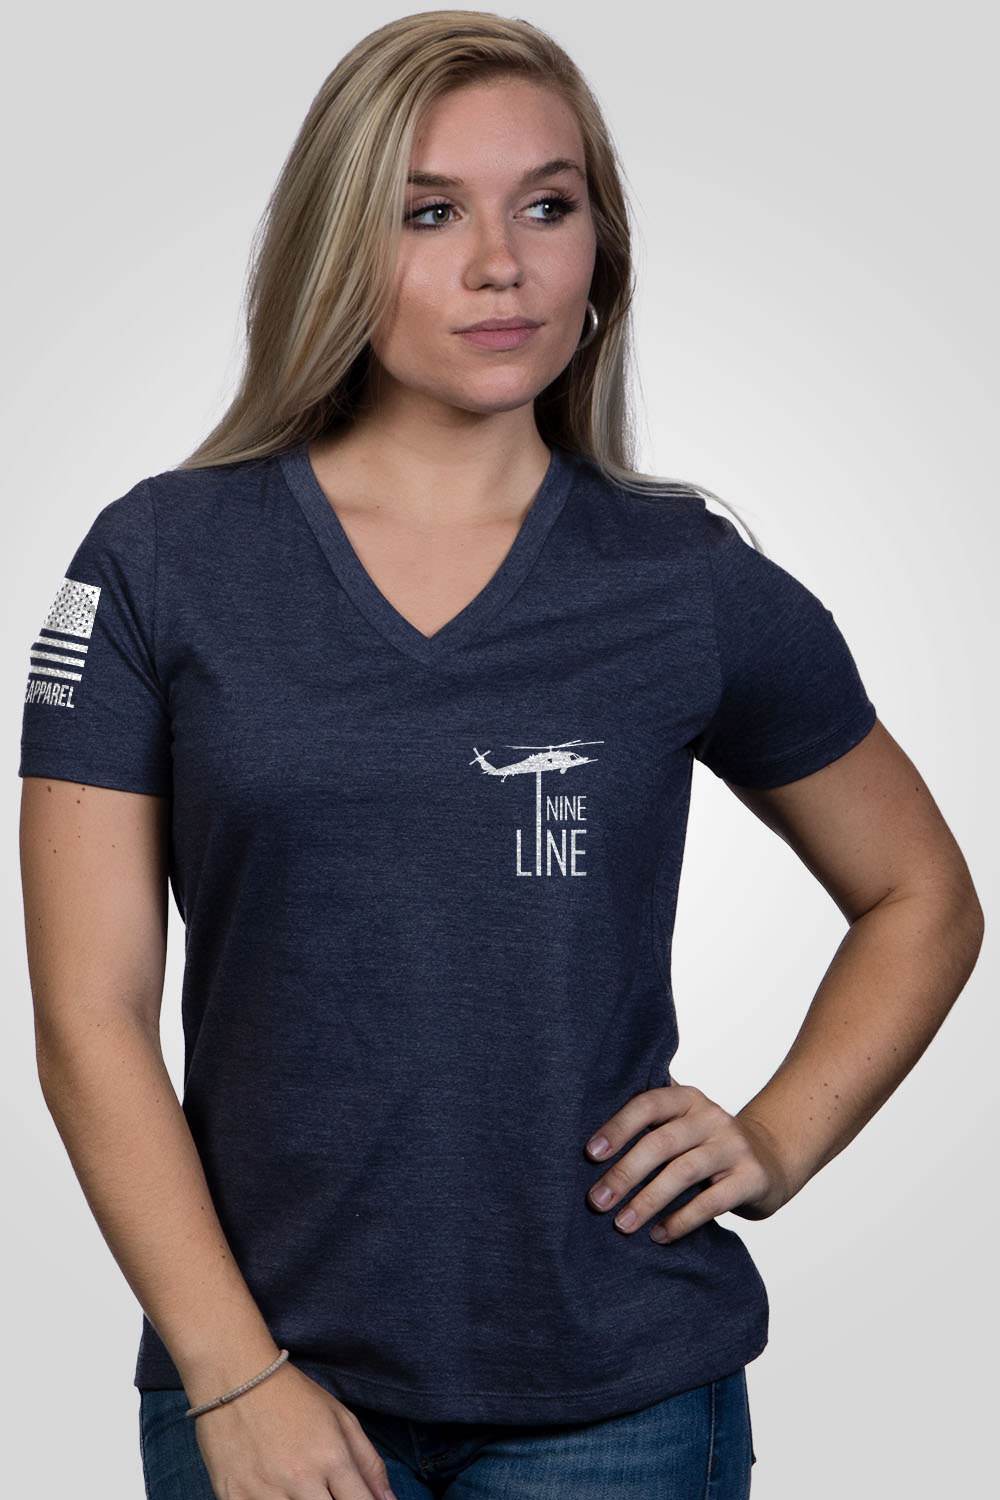 Women's Relaxed Fit V-Neck Shirt - American Drop Line - Nine Line Apparel